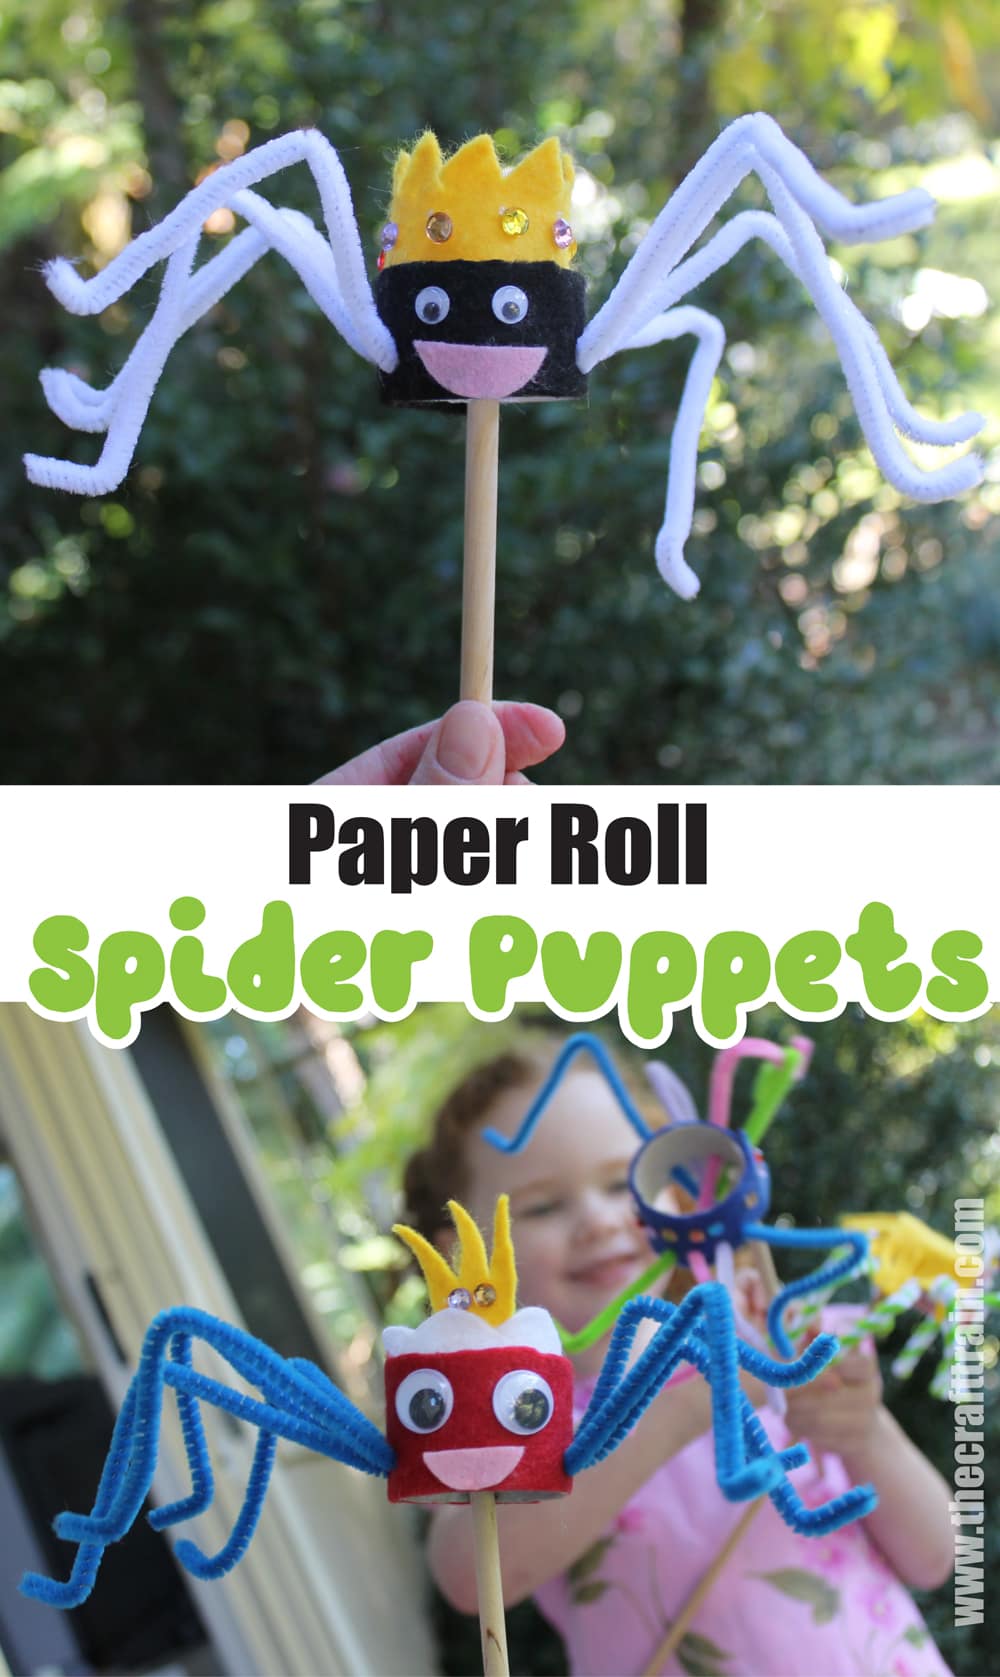 paper roll puppets spiders